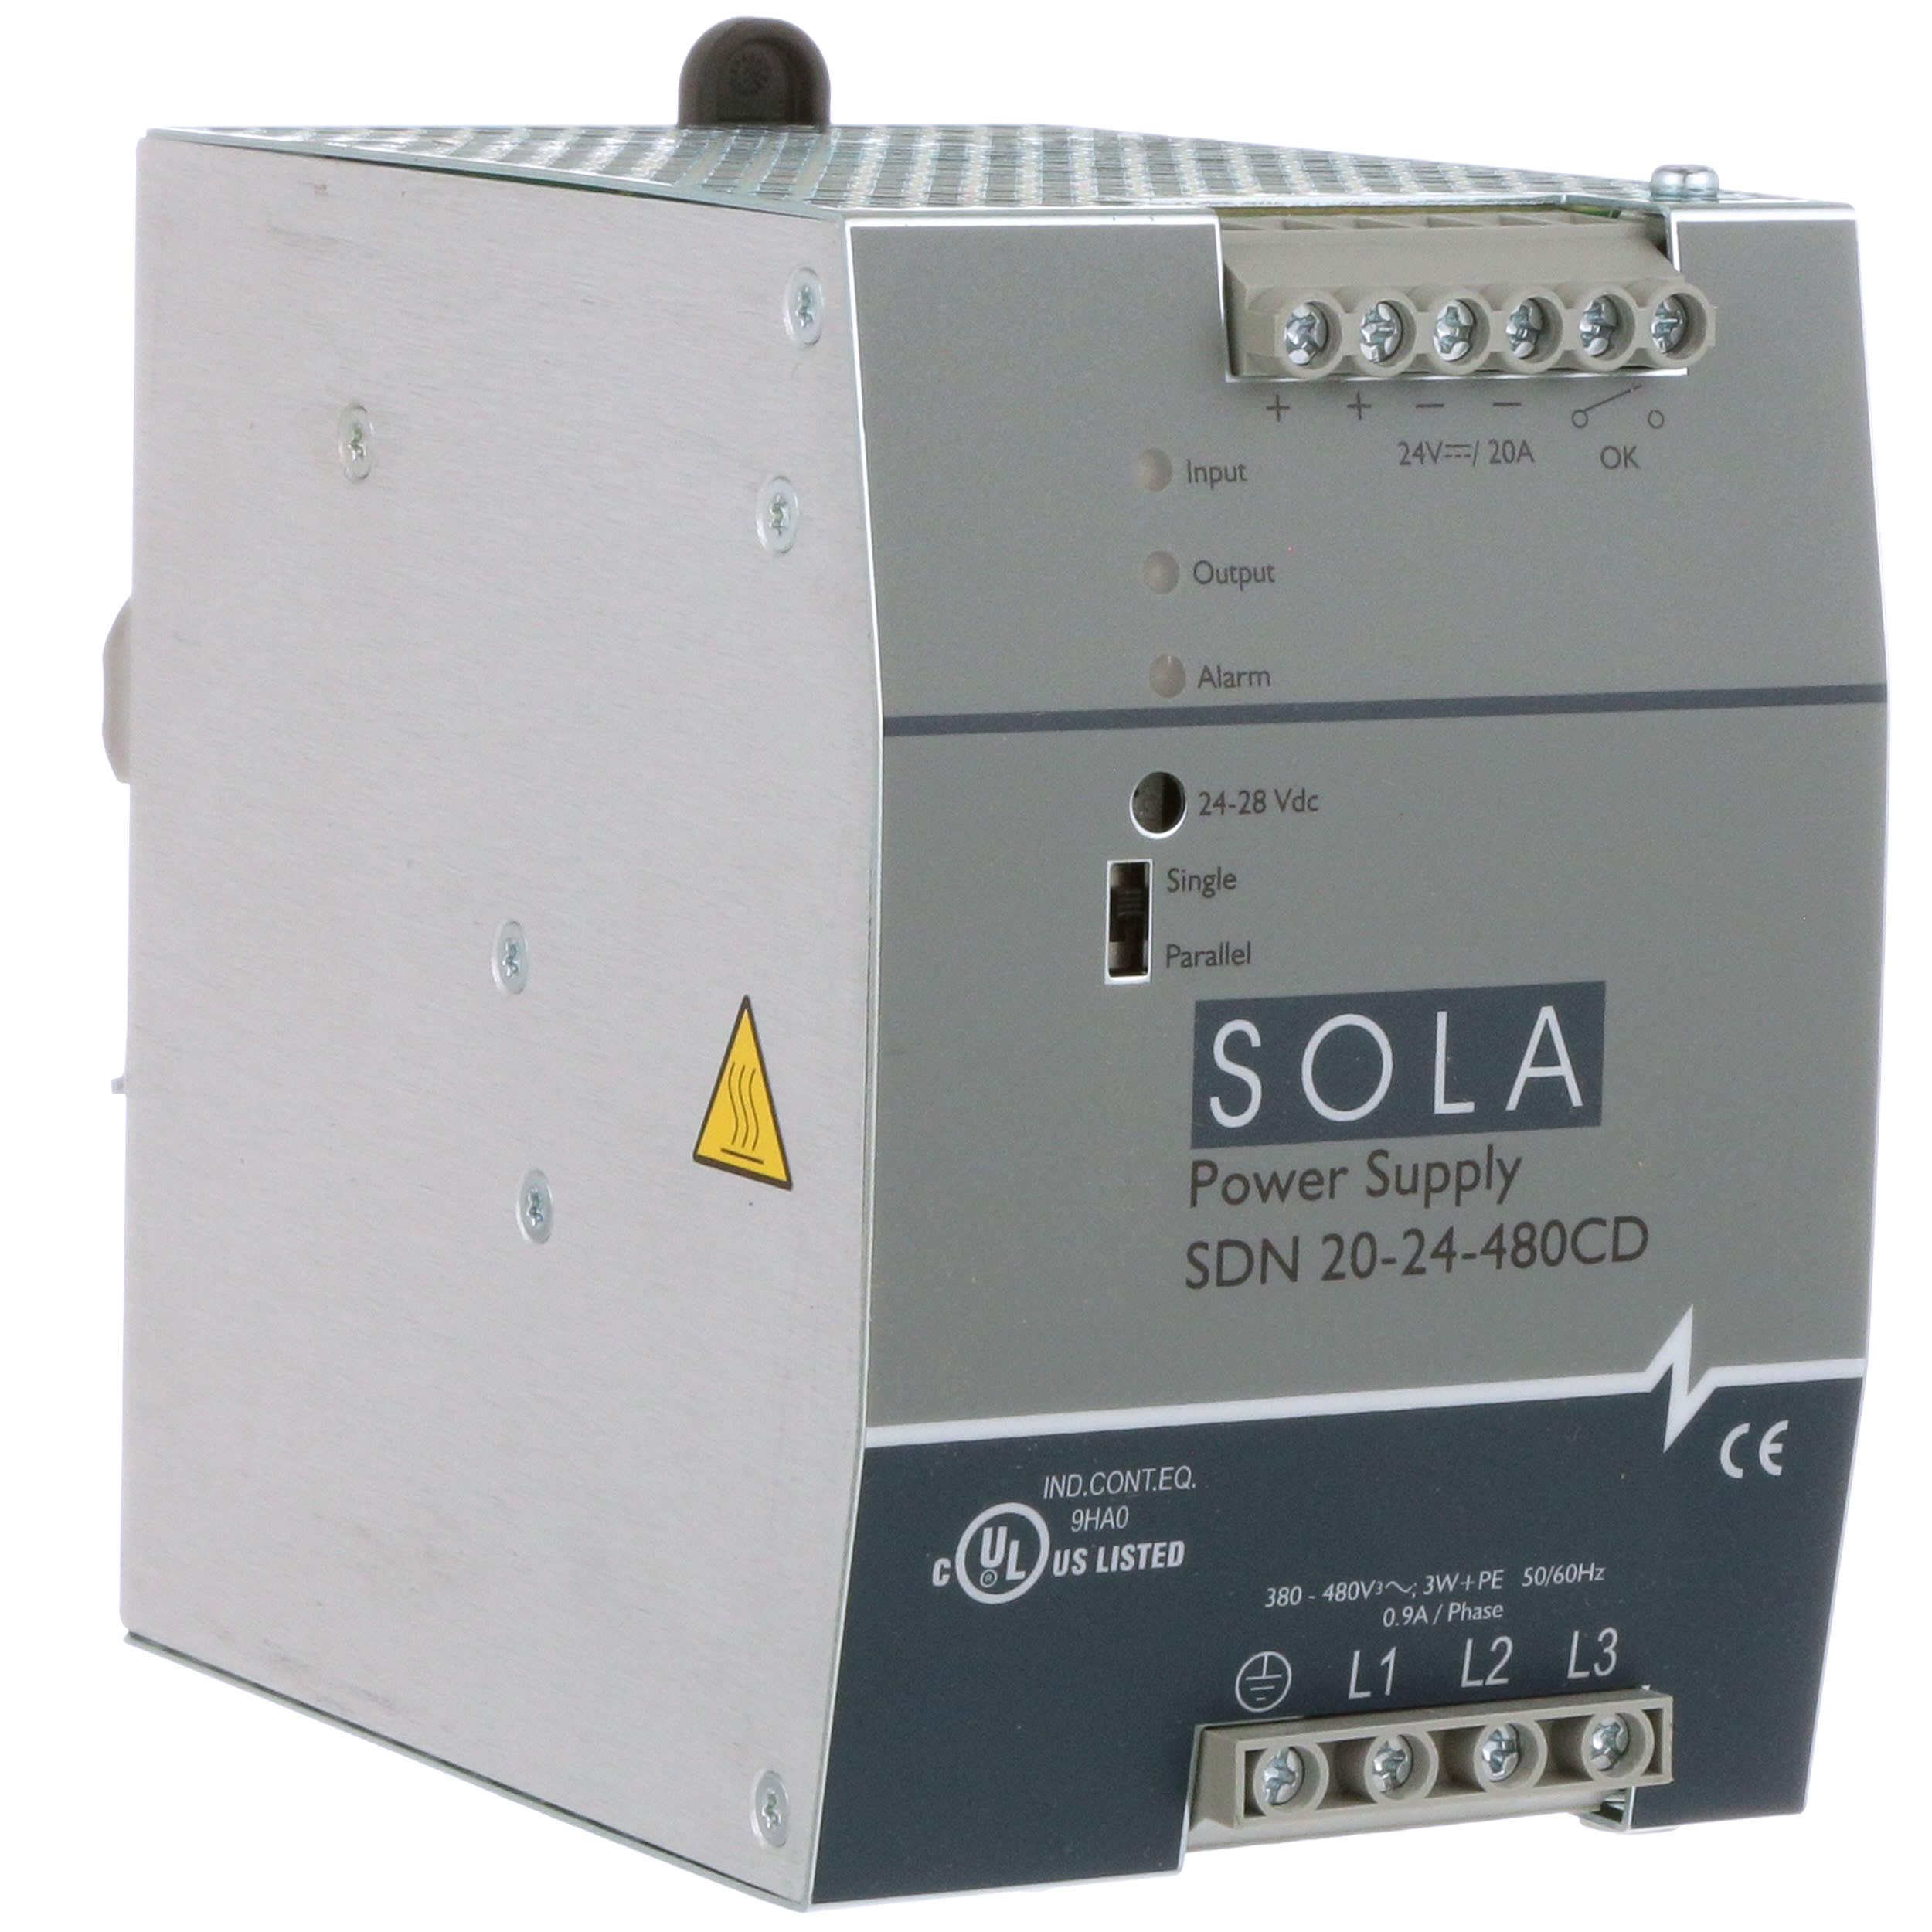 SOLA SDN 20-24-480 Power Supply 24 VDC 20 Amp Output 480 VAC Input for sale online 